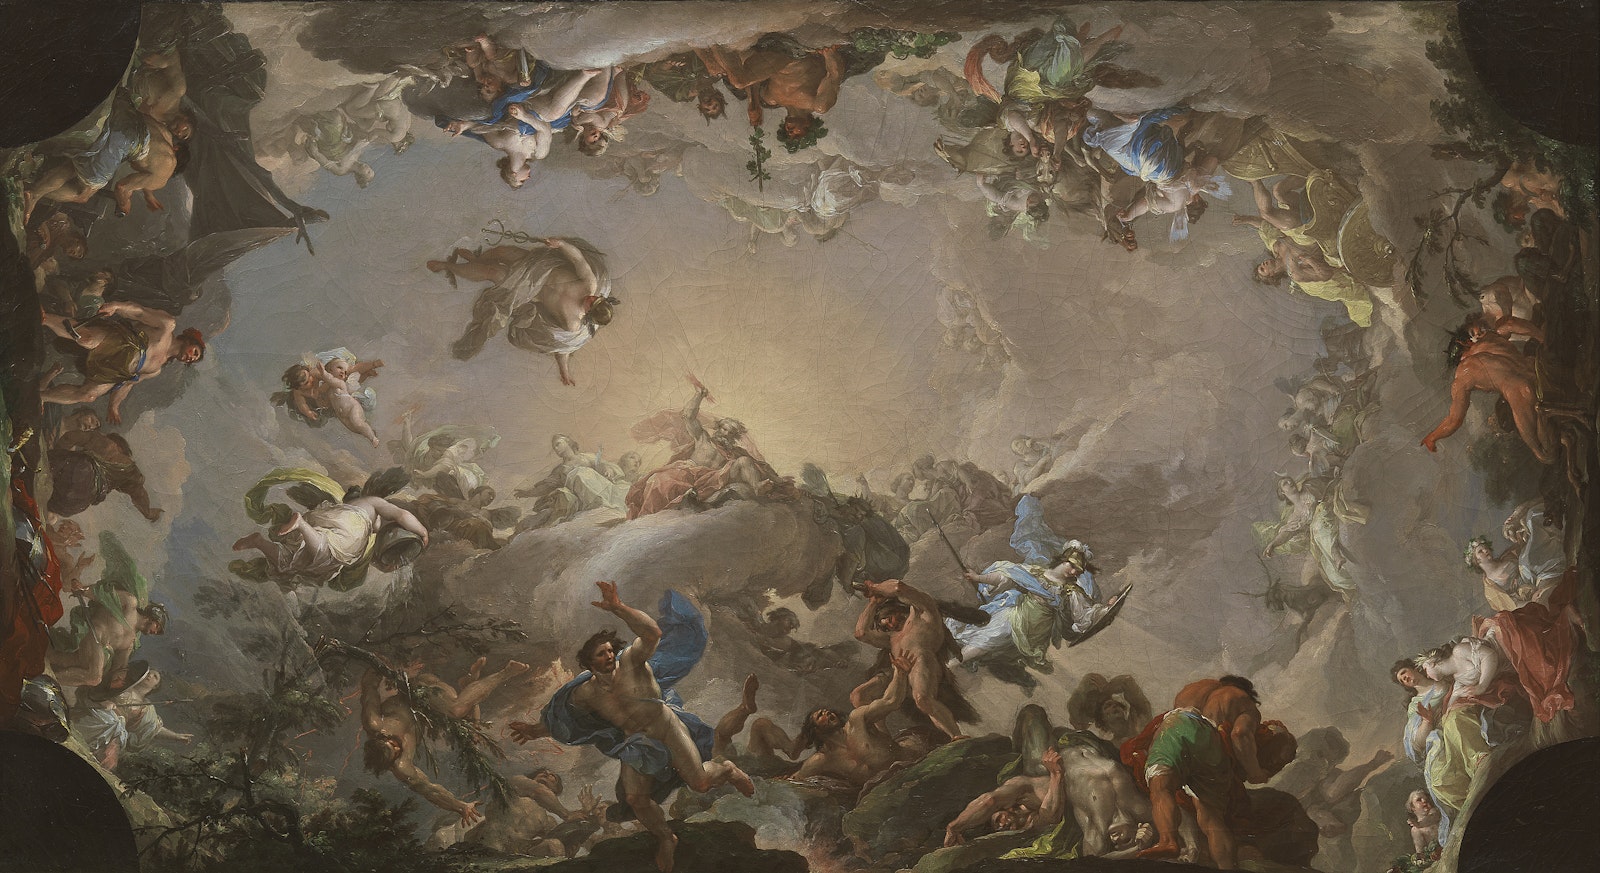 Olympus the fall of the giants by Francisco Bayeu y Subías-1764